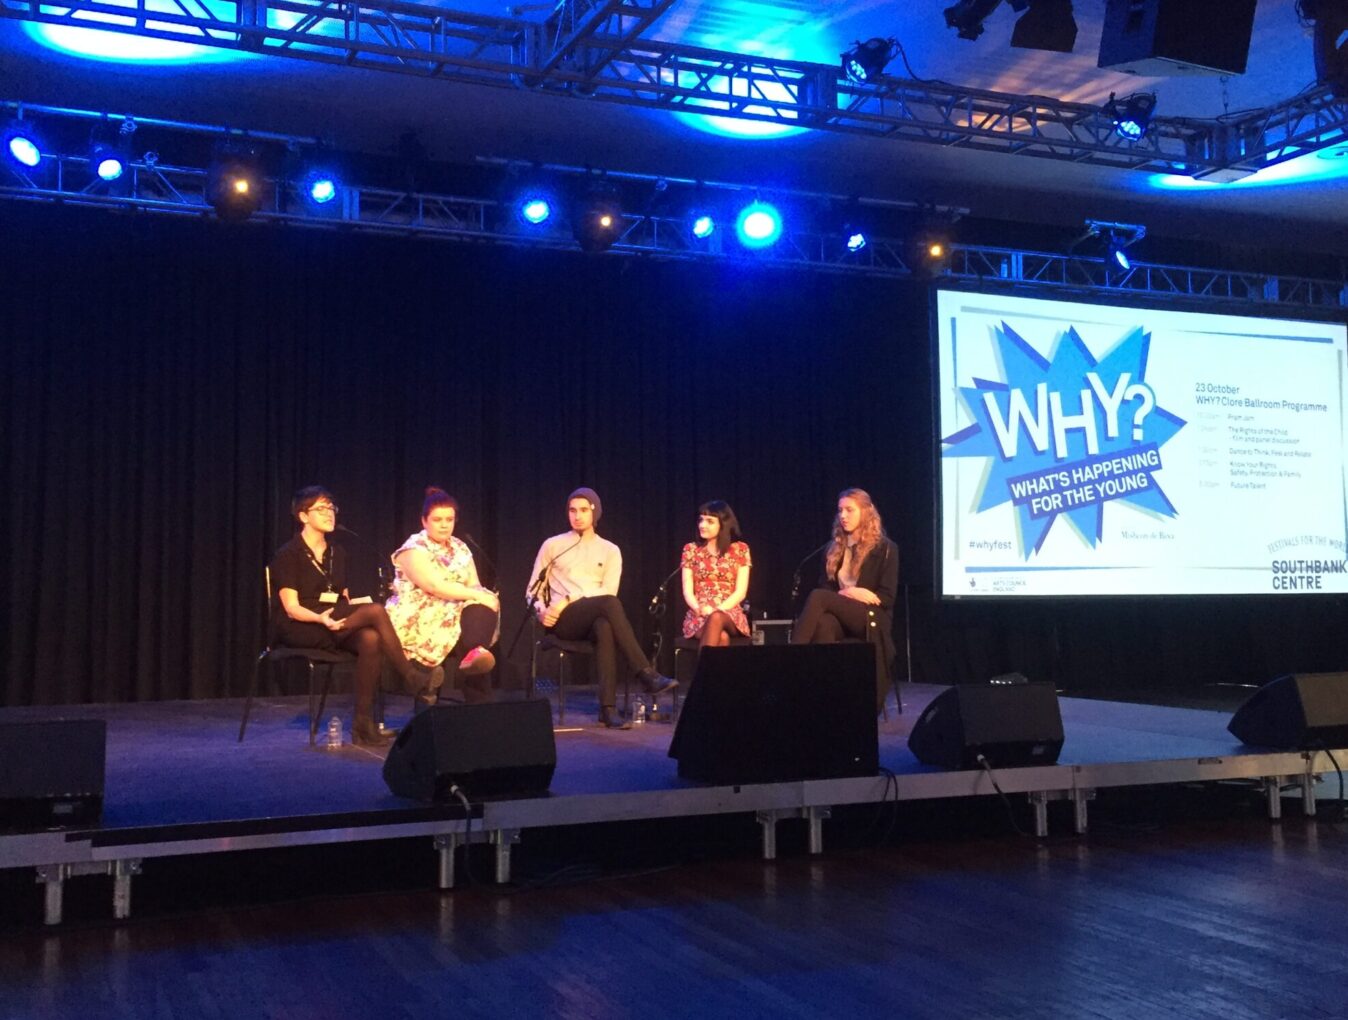 A group of adults sat on chairs at WHY festival speaking as part of a panel